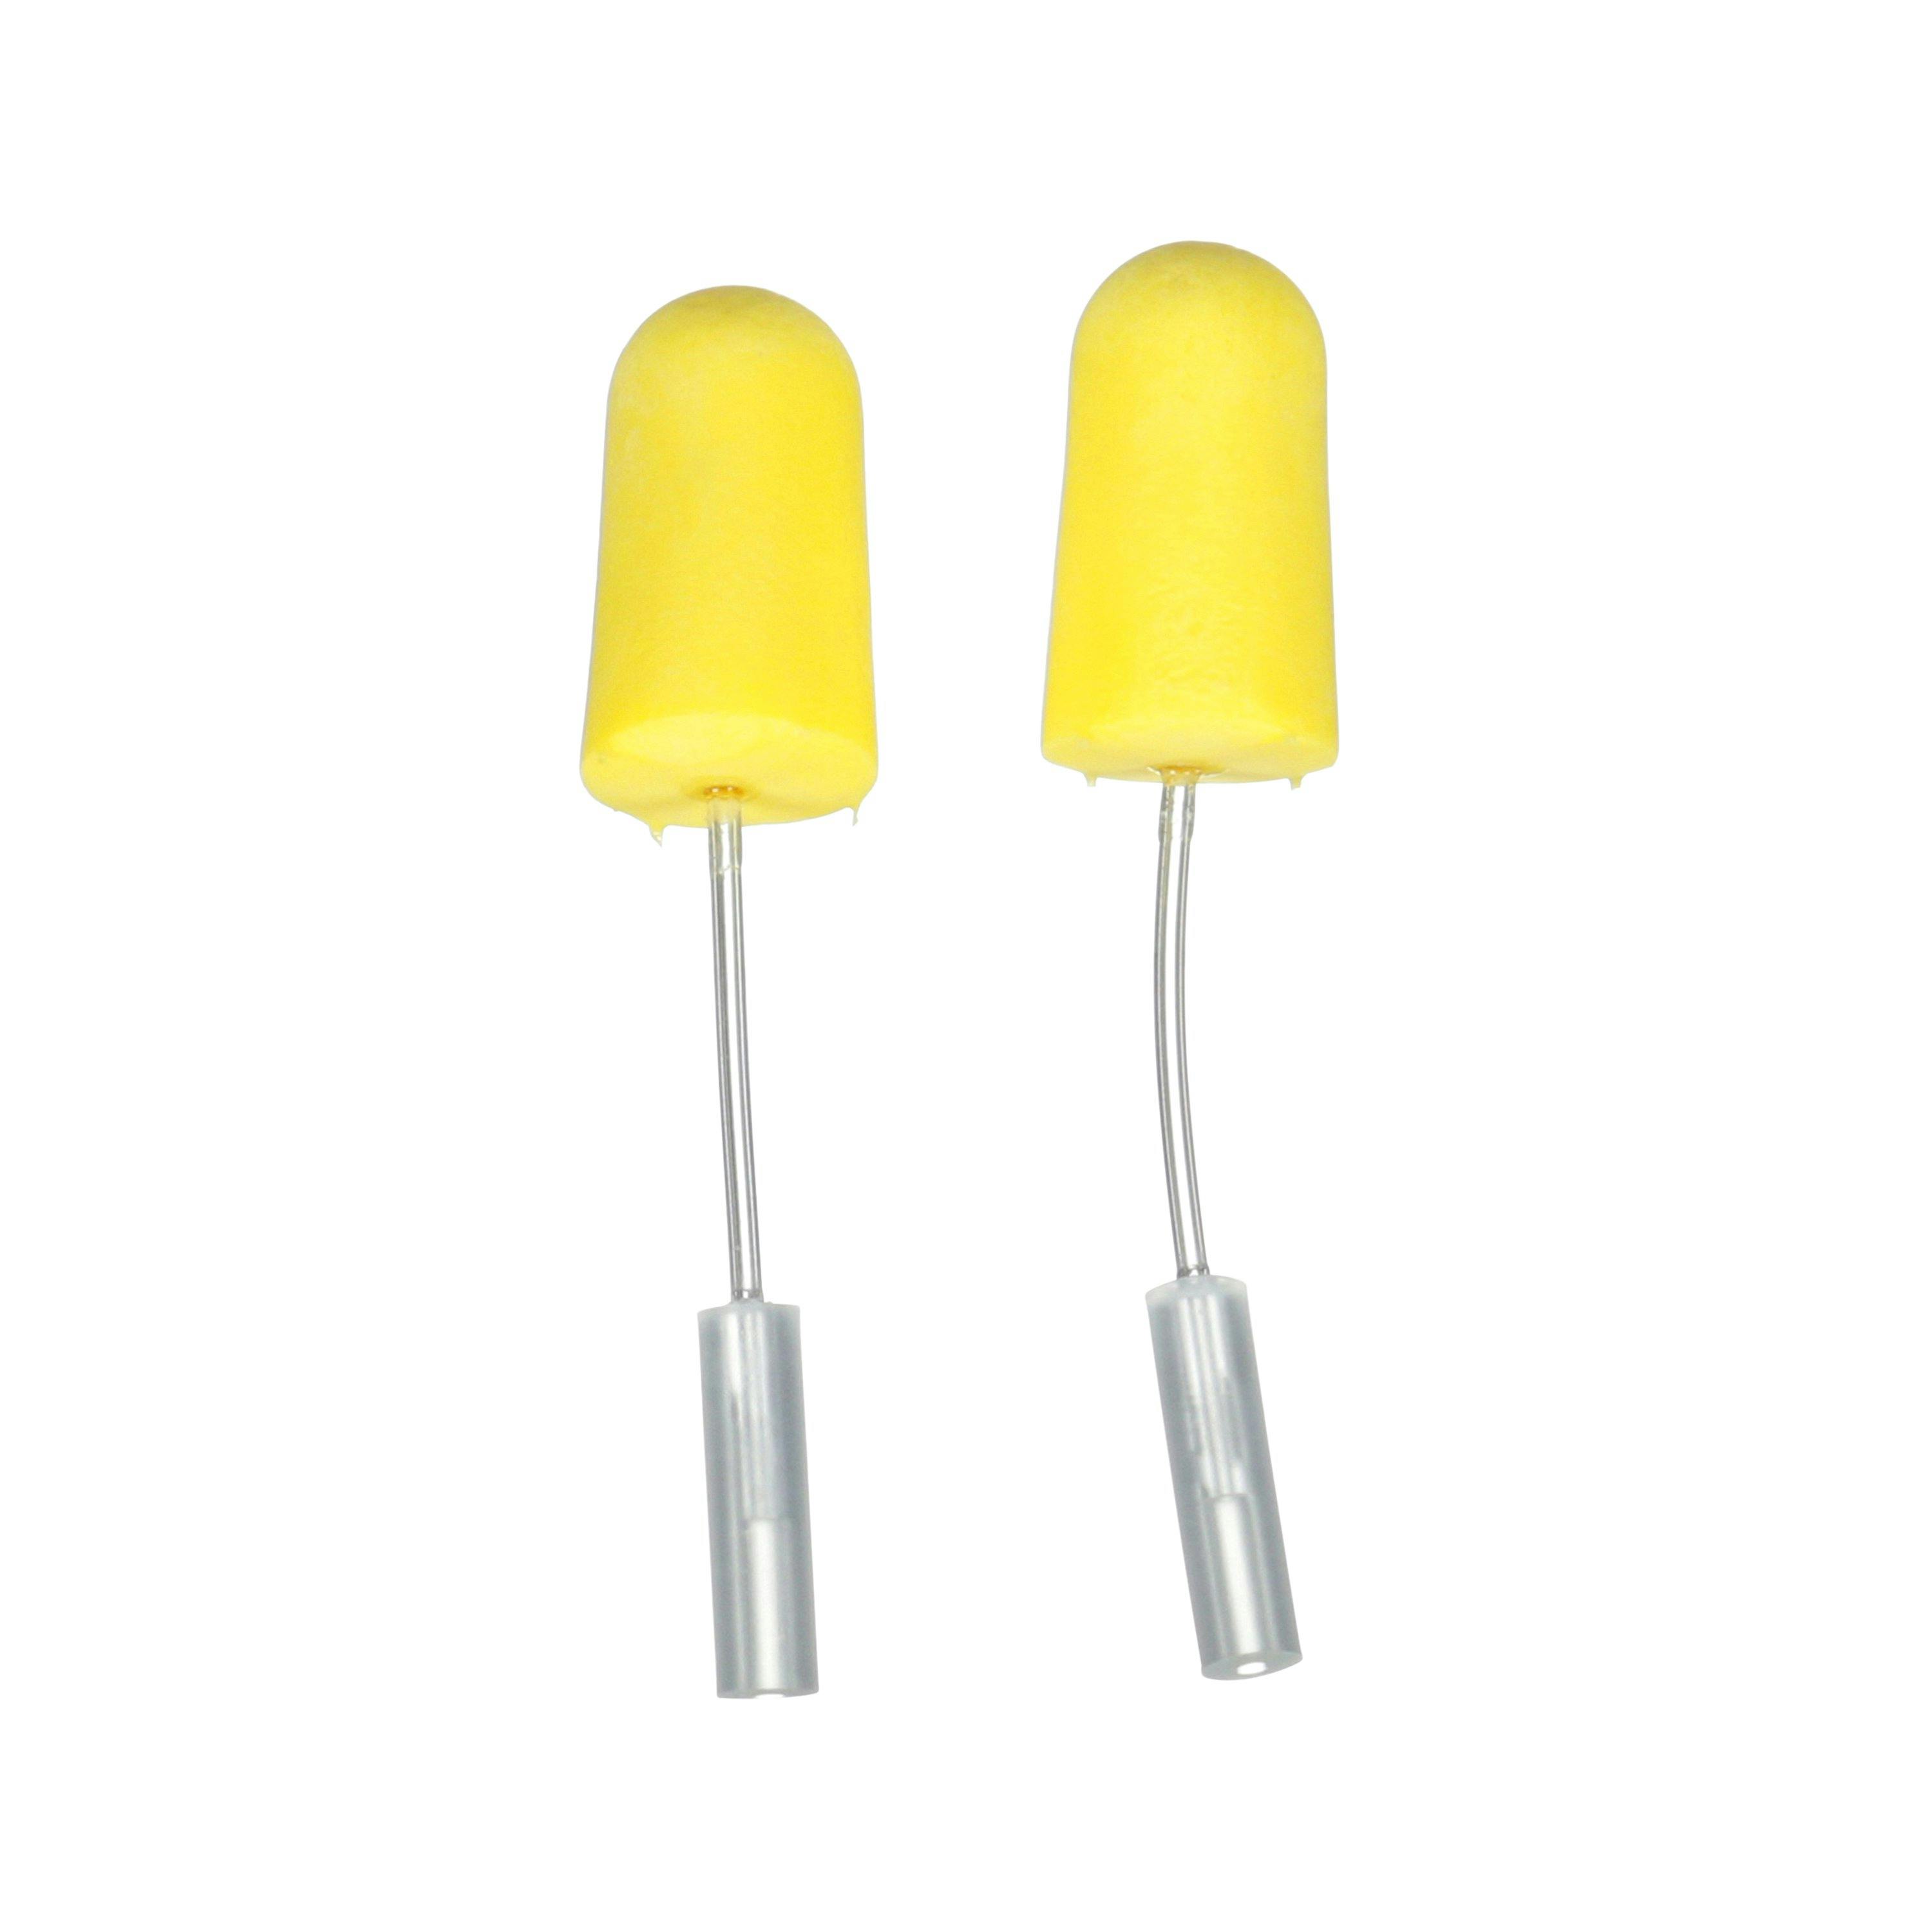 3M™ E-A-R™ TaperFit™ 2 Large Probed Test Plugs 393-2027-50, 50 Pair/Case